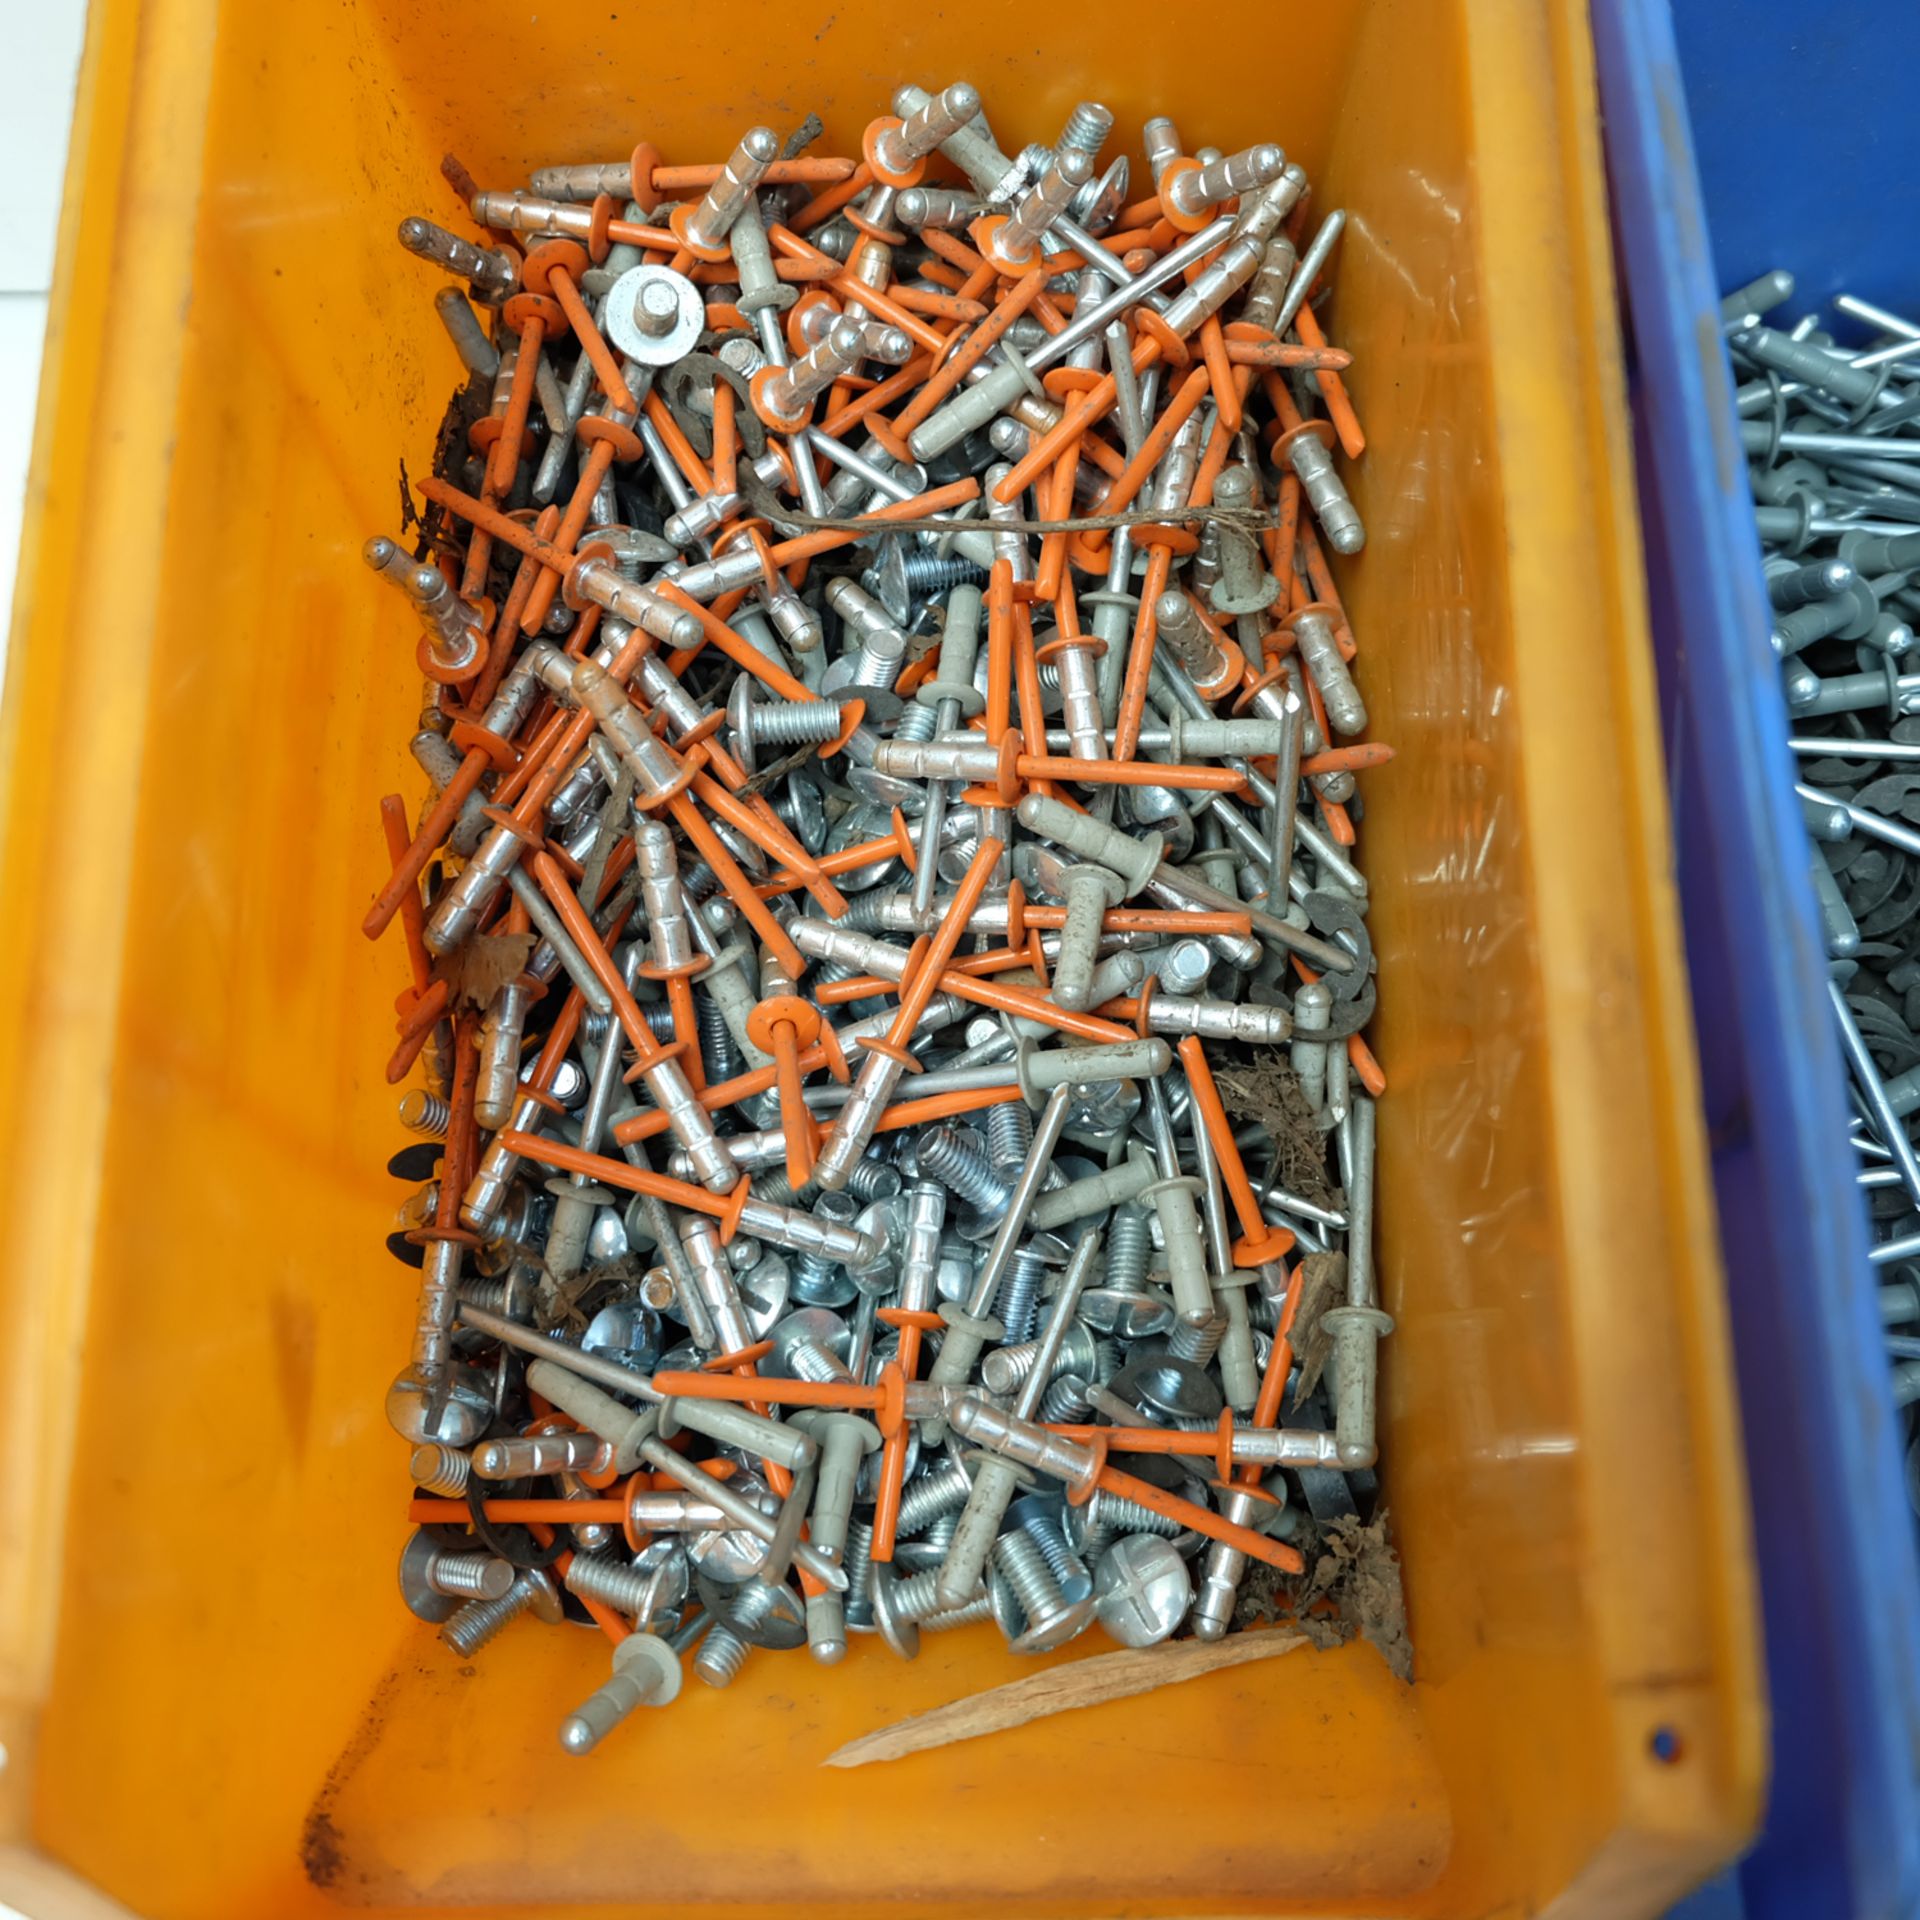 Selection of Miscellaneous Nuts, Bolts, Washers etc. - Image 9 of 9